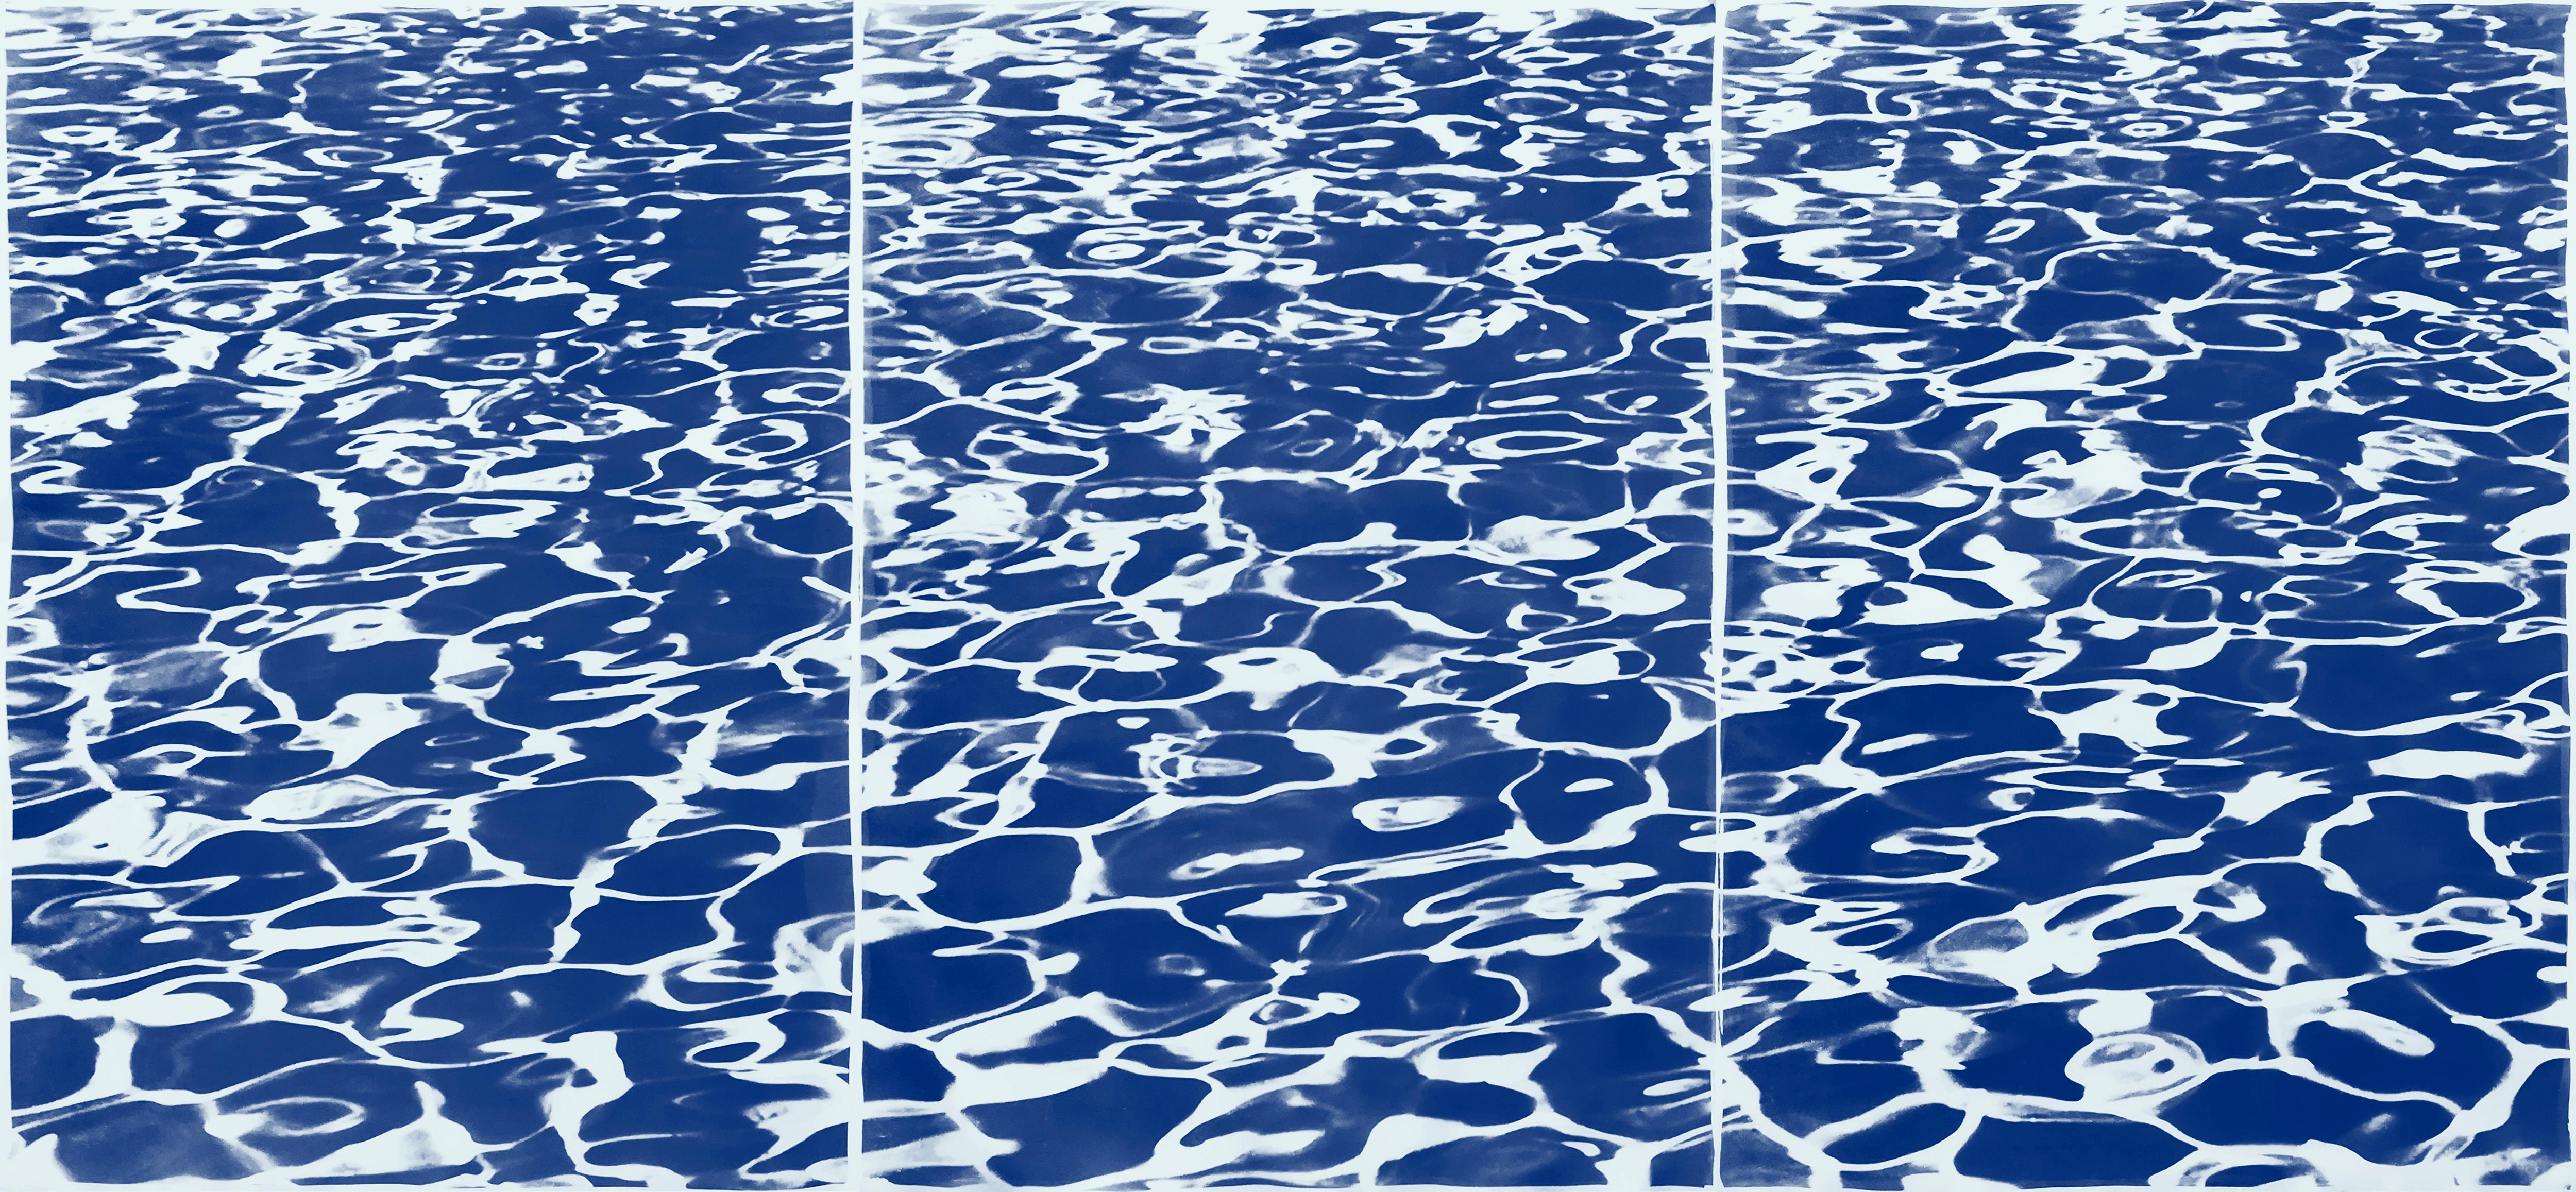 Kind of Cyan Abstract Print - Pool Patterns, Nautical Abstract Seascape Triptych, Blue Cyanotype Print